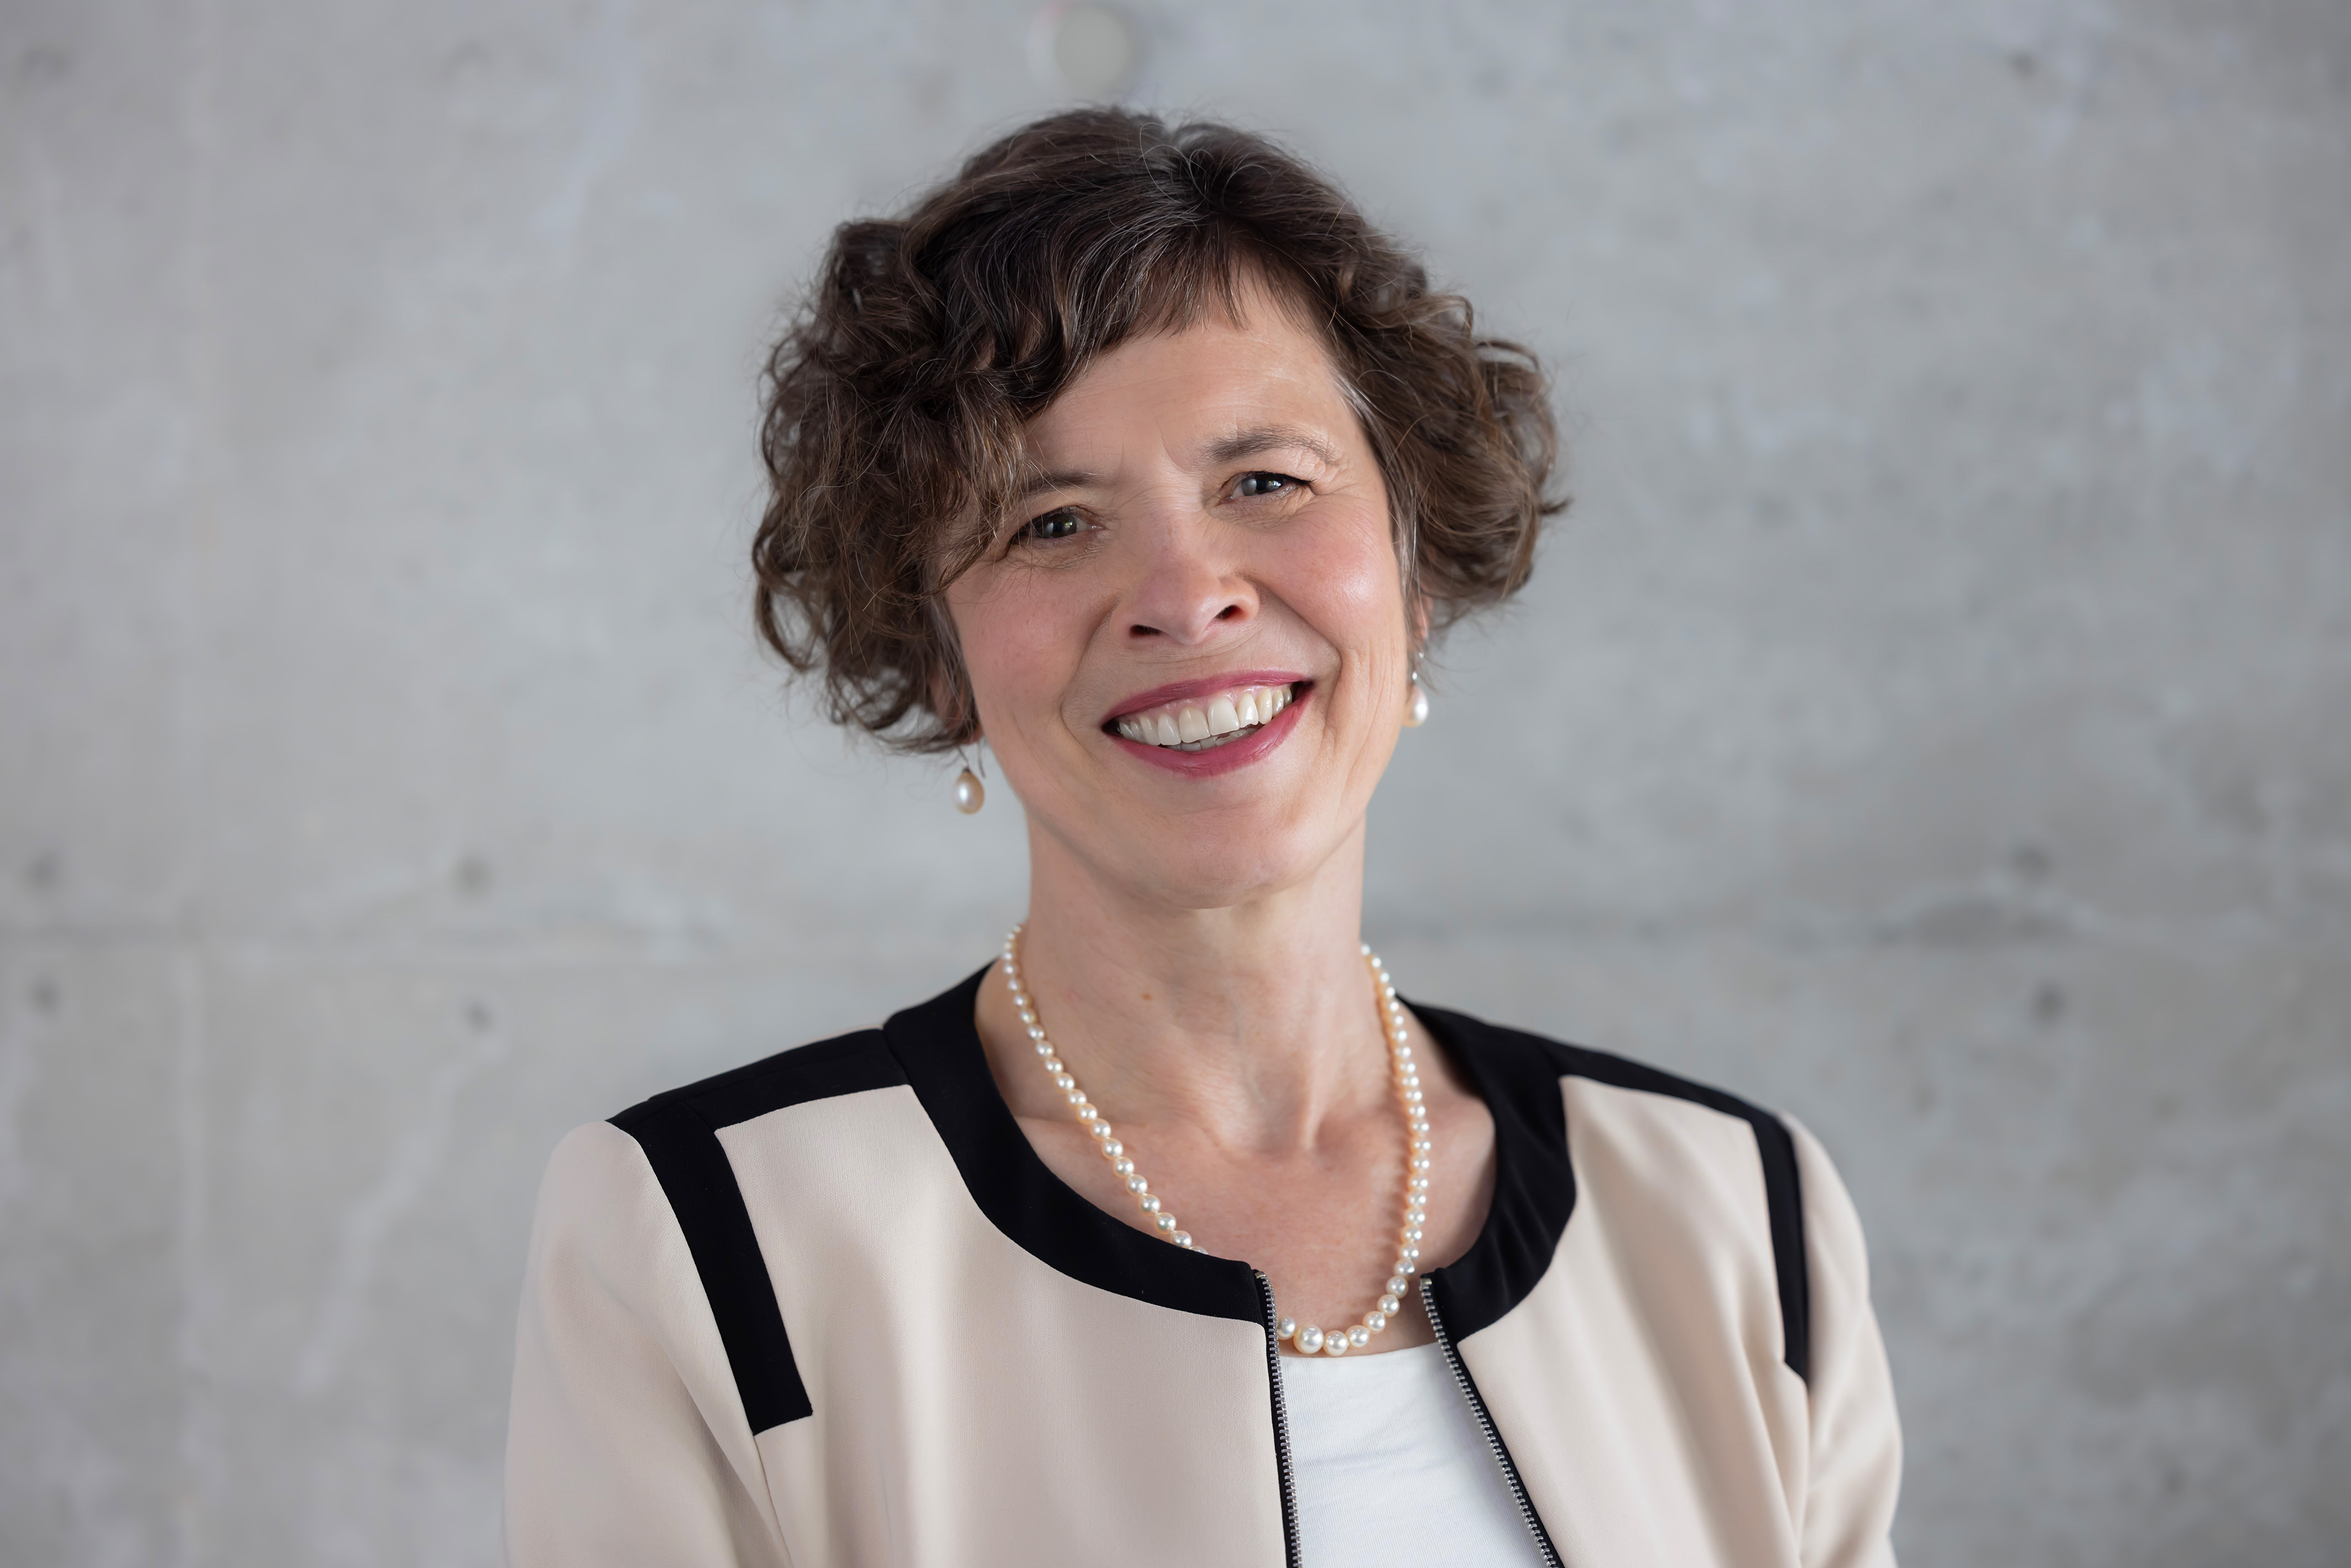 Prof. Dr. Christiane Jost, Vice-President for Studying, Teaching, and International Affairs